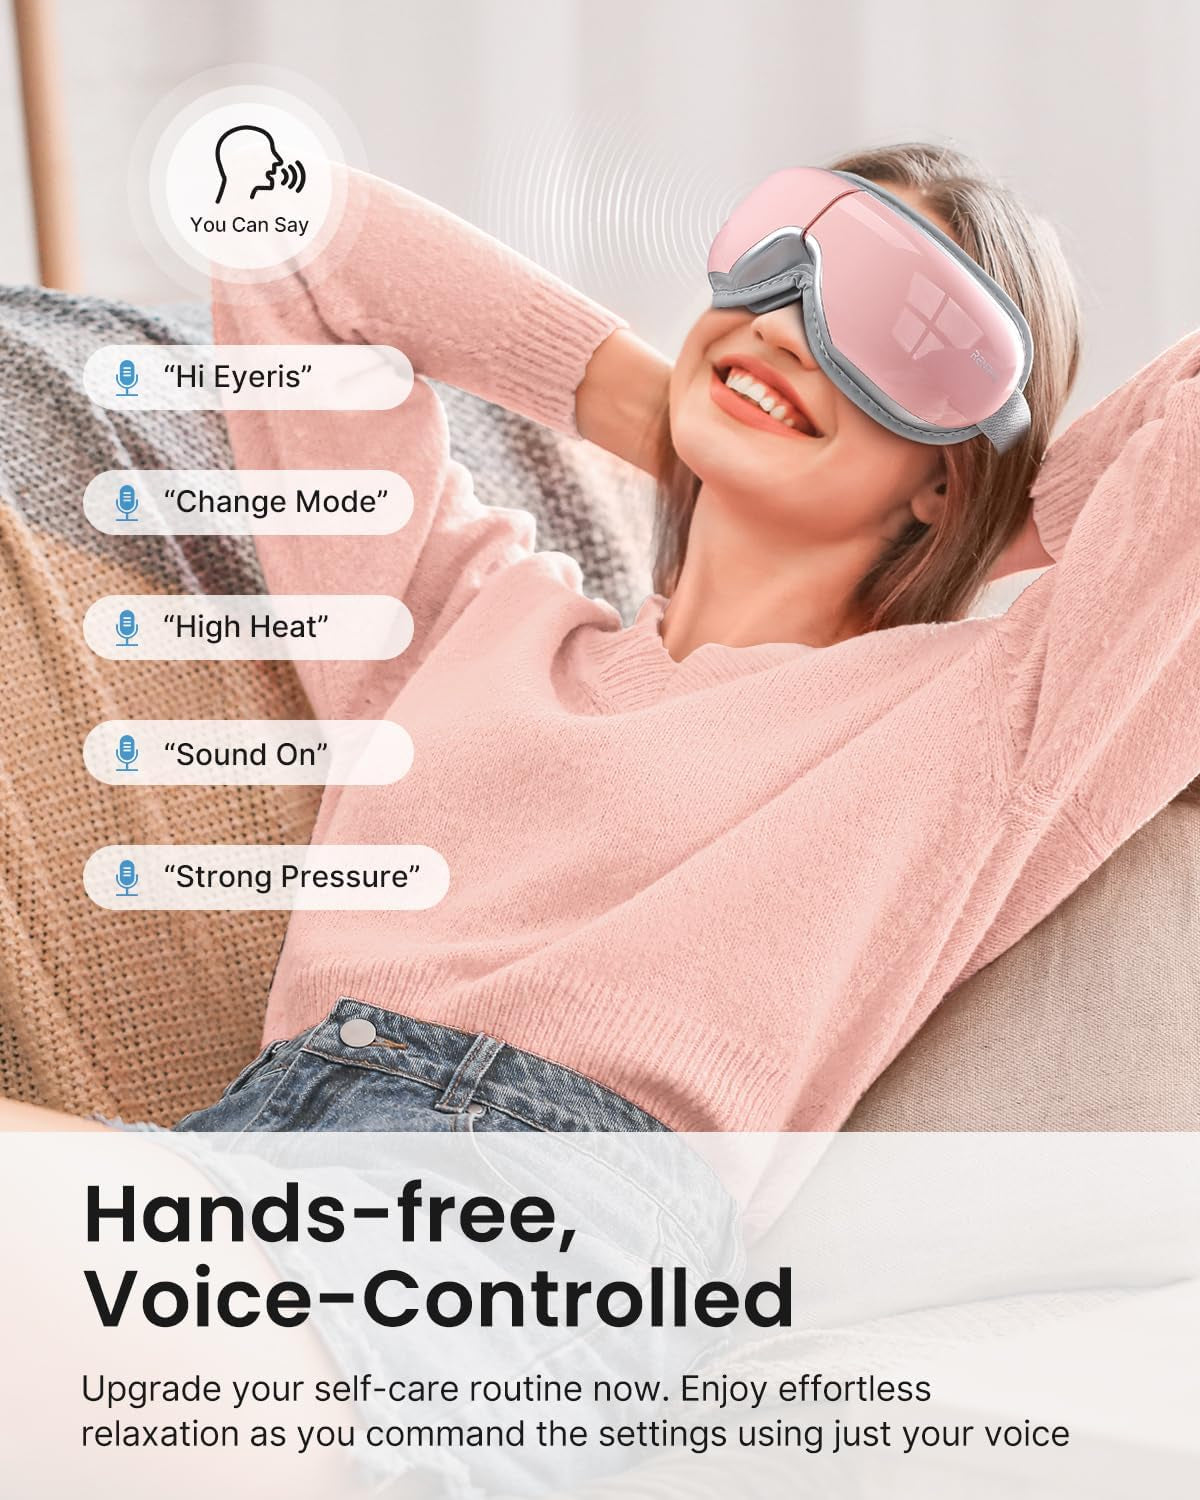 RENPHO Eyeris 1V - Voice Controlled Eye Massager for Migraines, Bluetooth Music Heated Eye Care Machine, Relax & Reduce Eye Strain Dark Circles Eye Bags, Face Massager, Gifts for Women/Mom